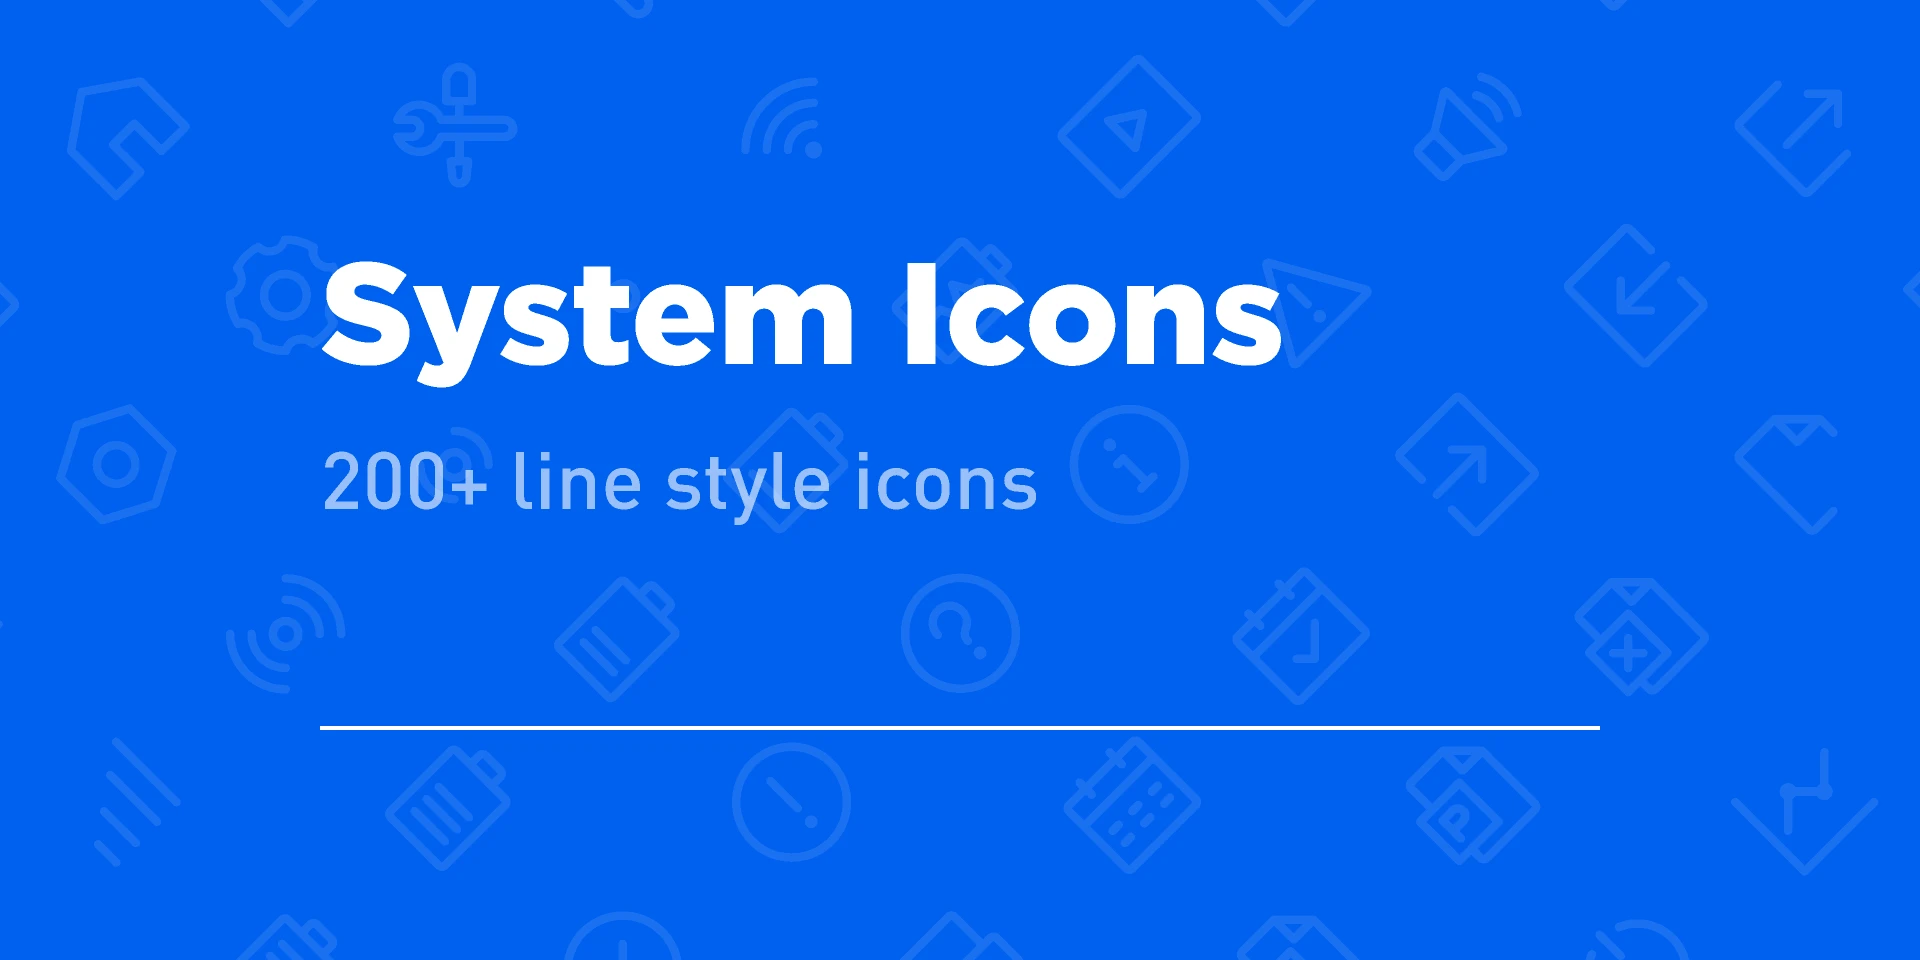 System icon for Figma and Adobe XD